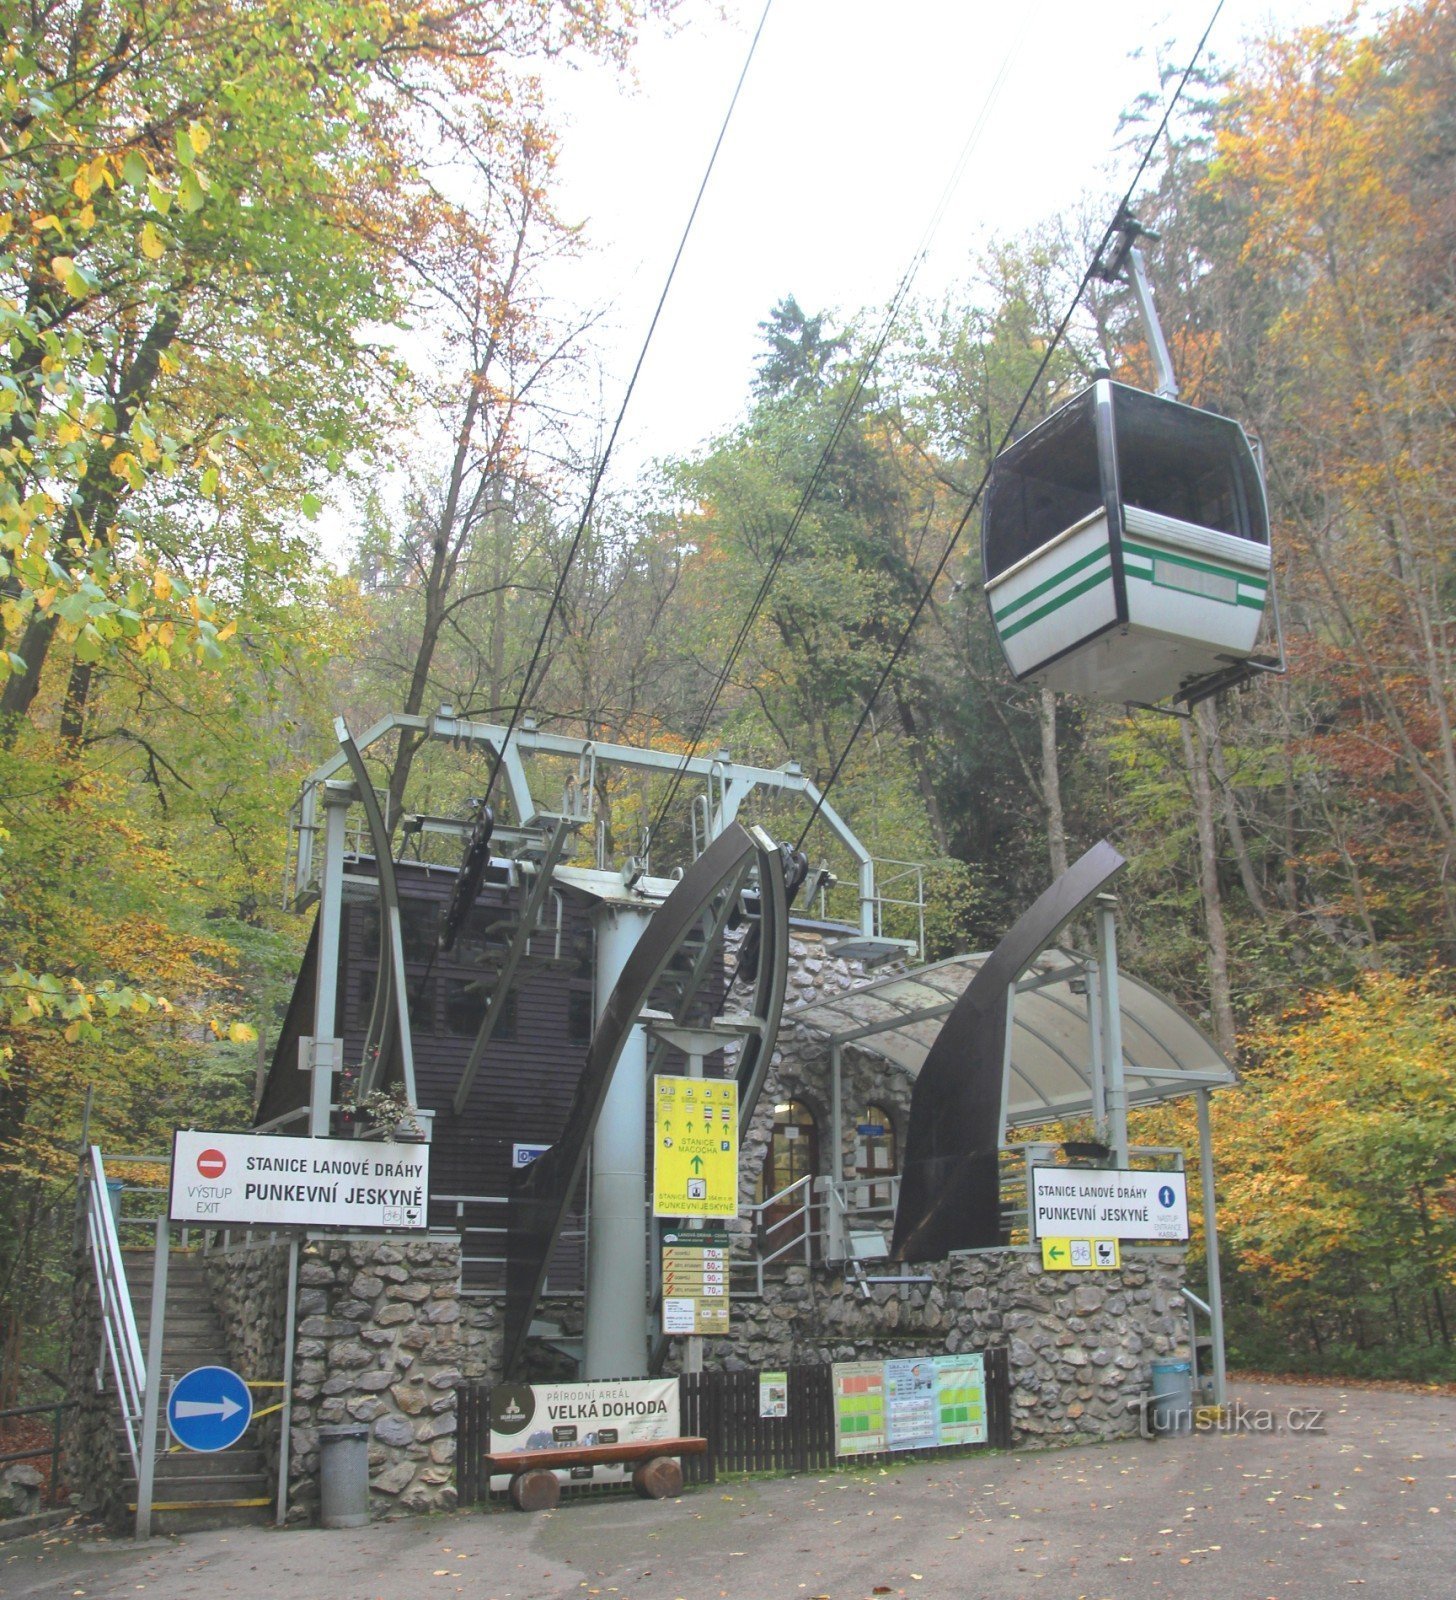 Lower cable car station